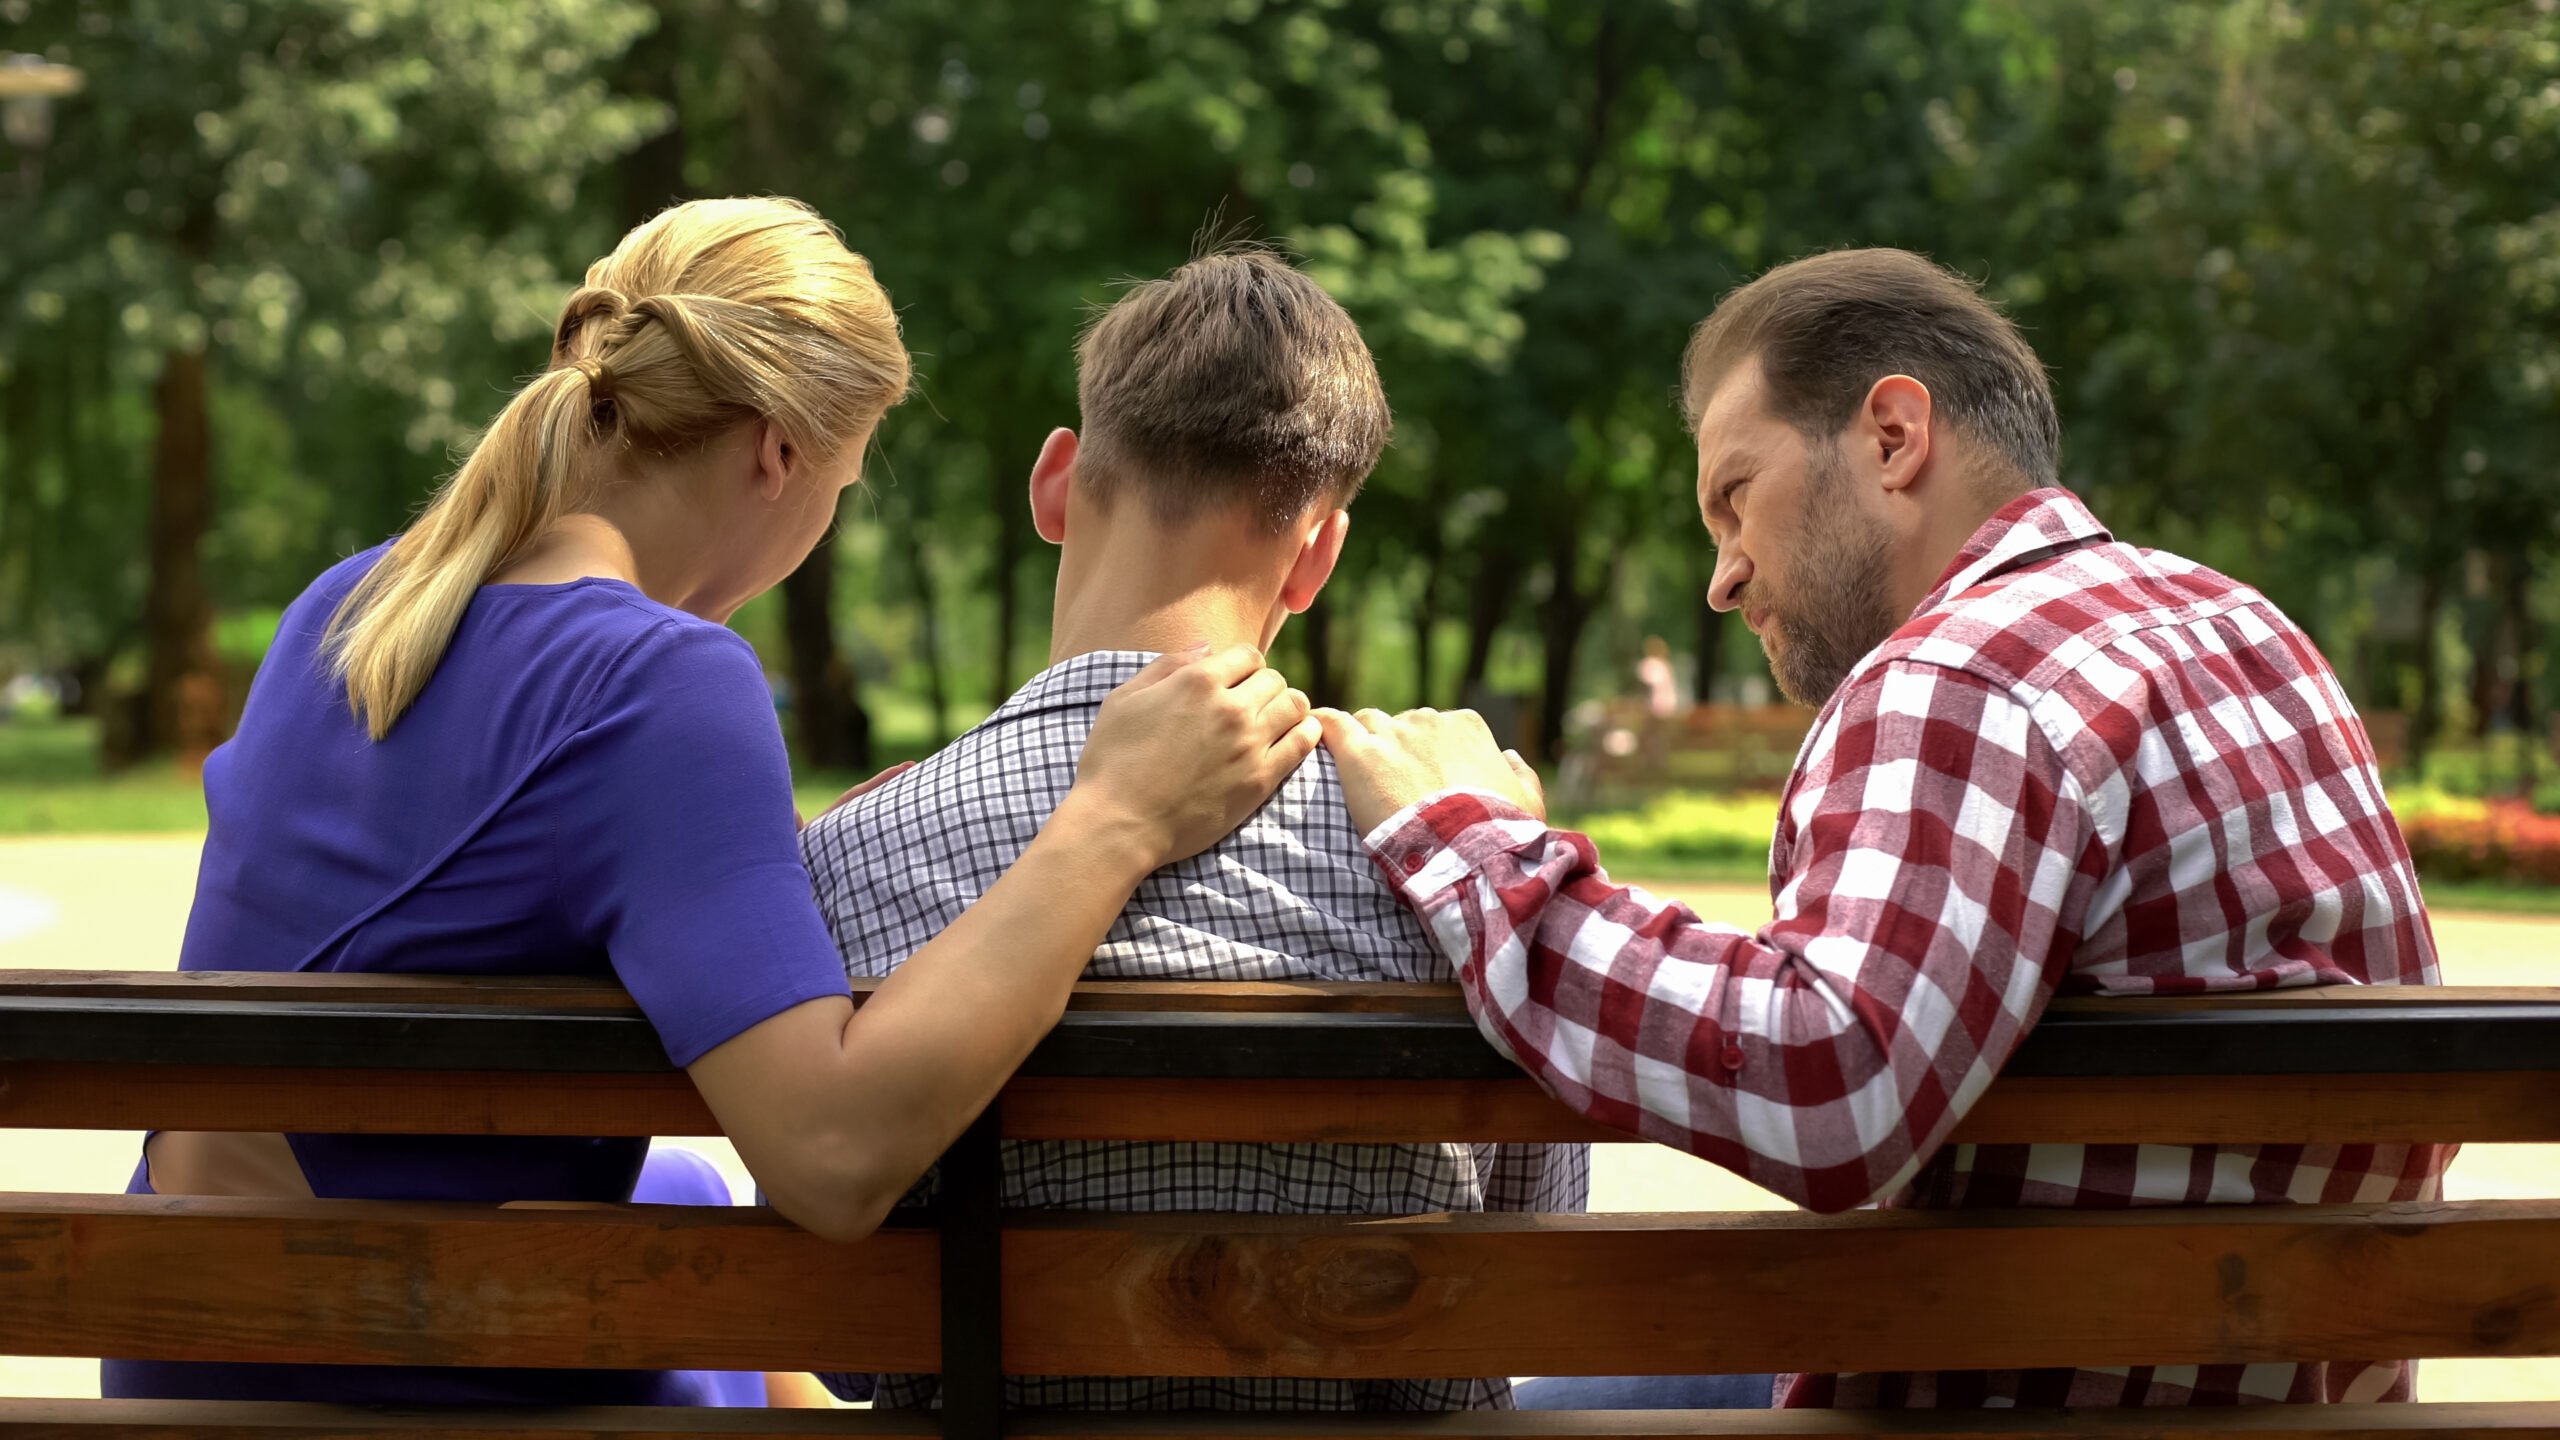 Caring mother and dad supporting sad teen son sitting on bench in park, consoling after the funeral